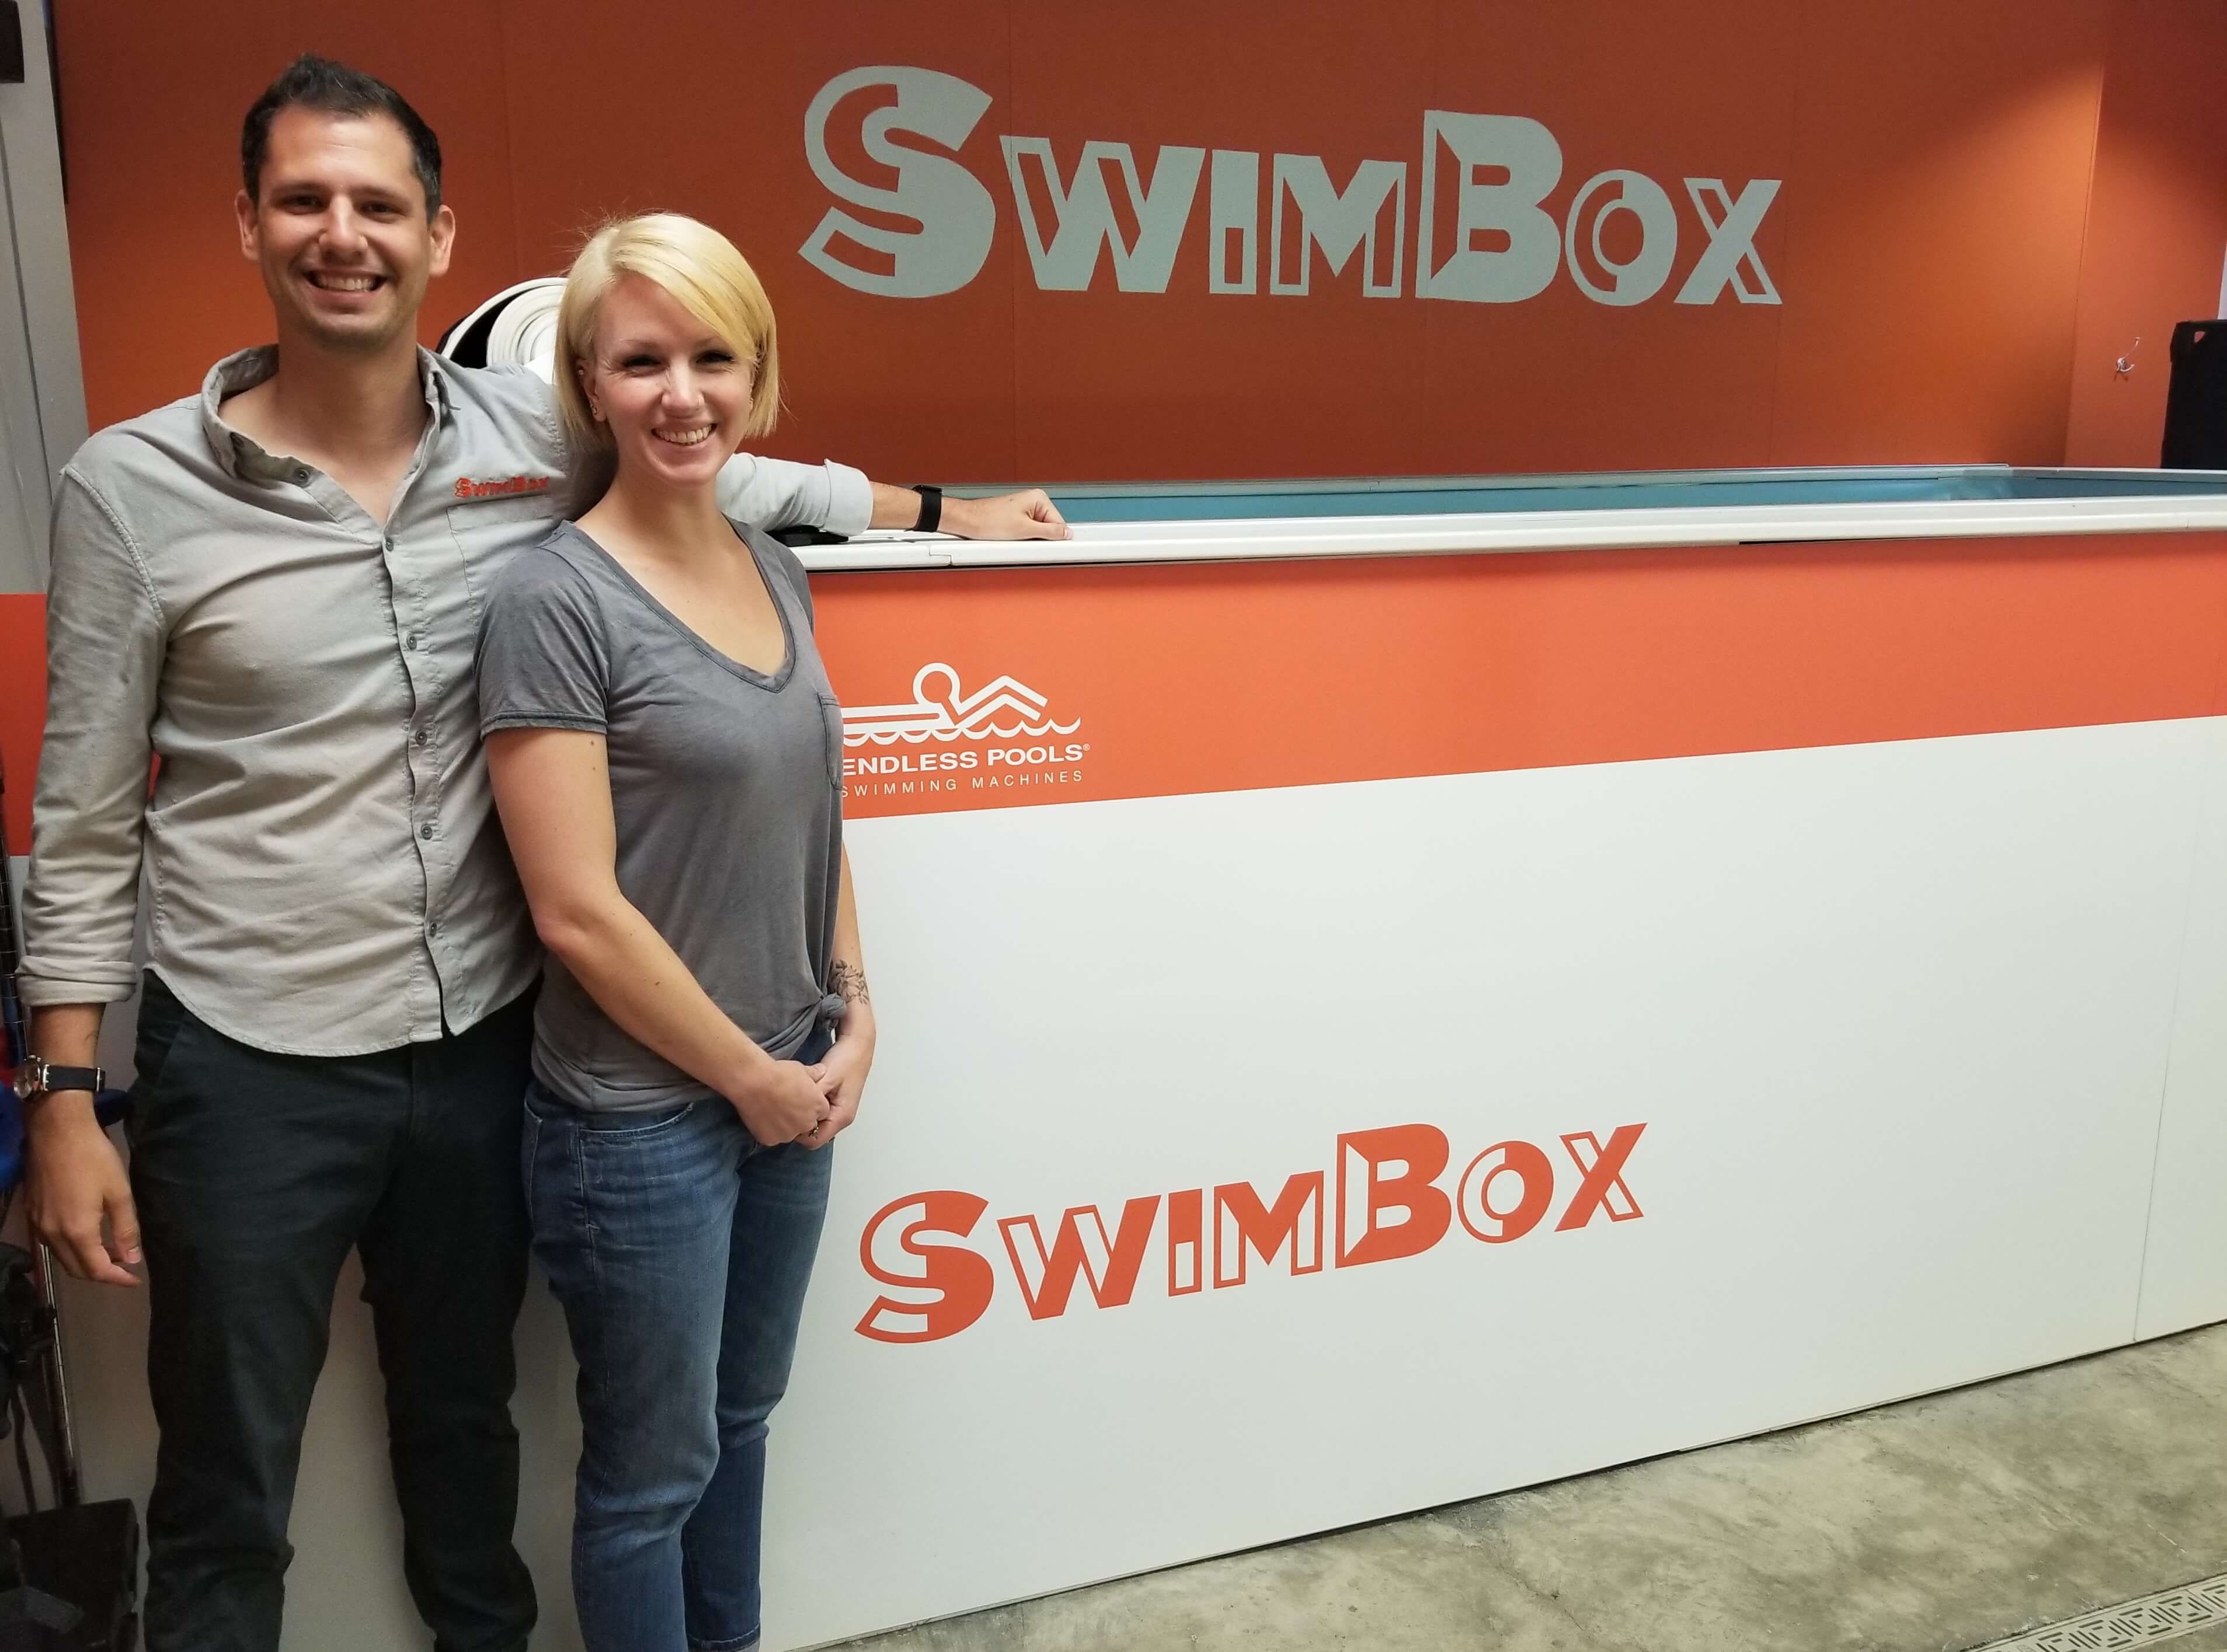 The Endless Pool at SwimBox, with the proud proprietors Dominic and Lissa Latella